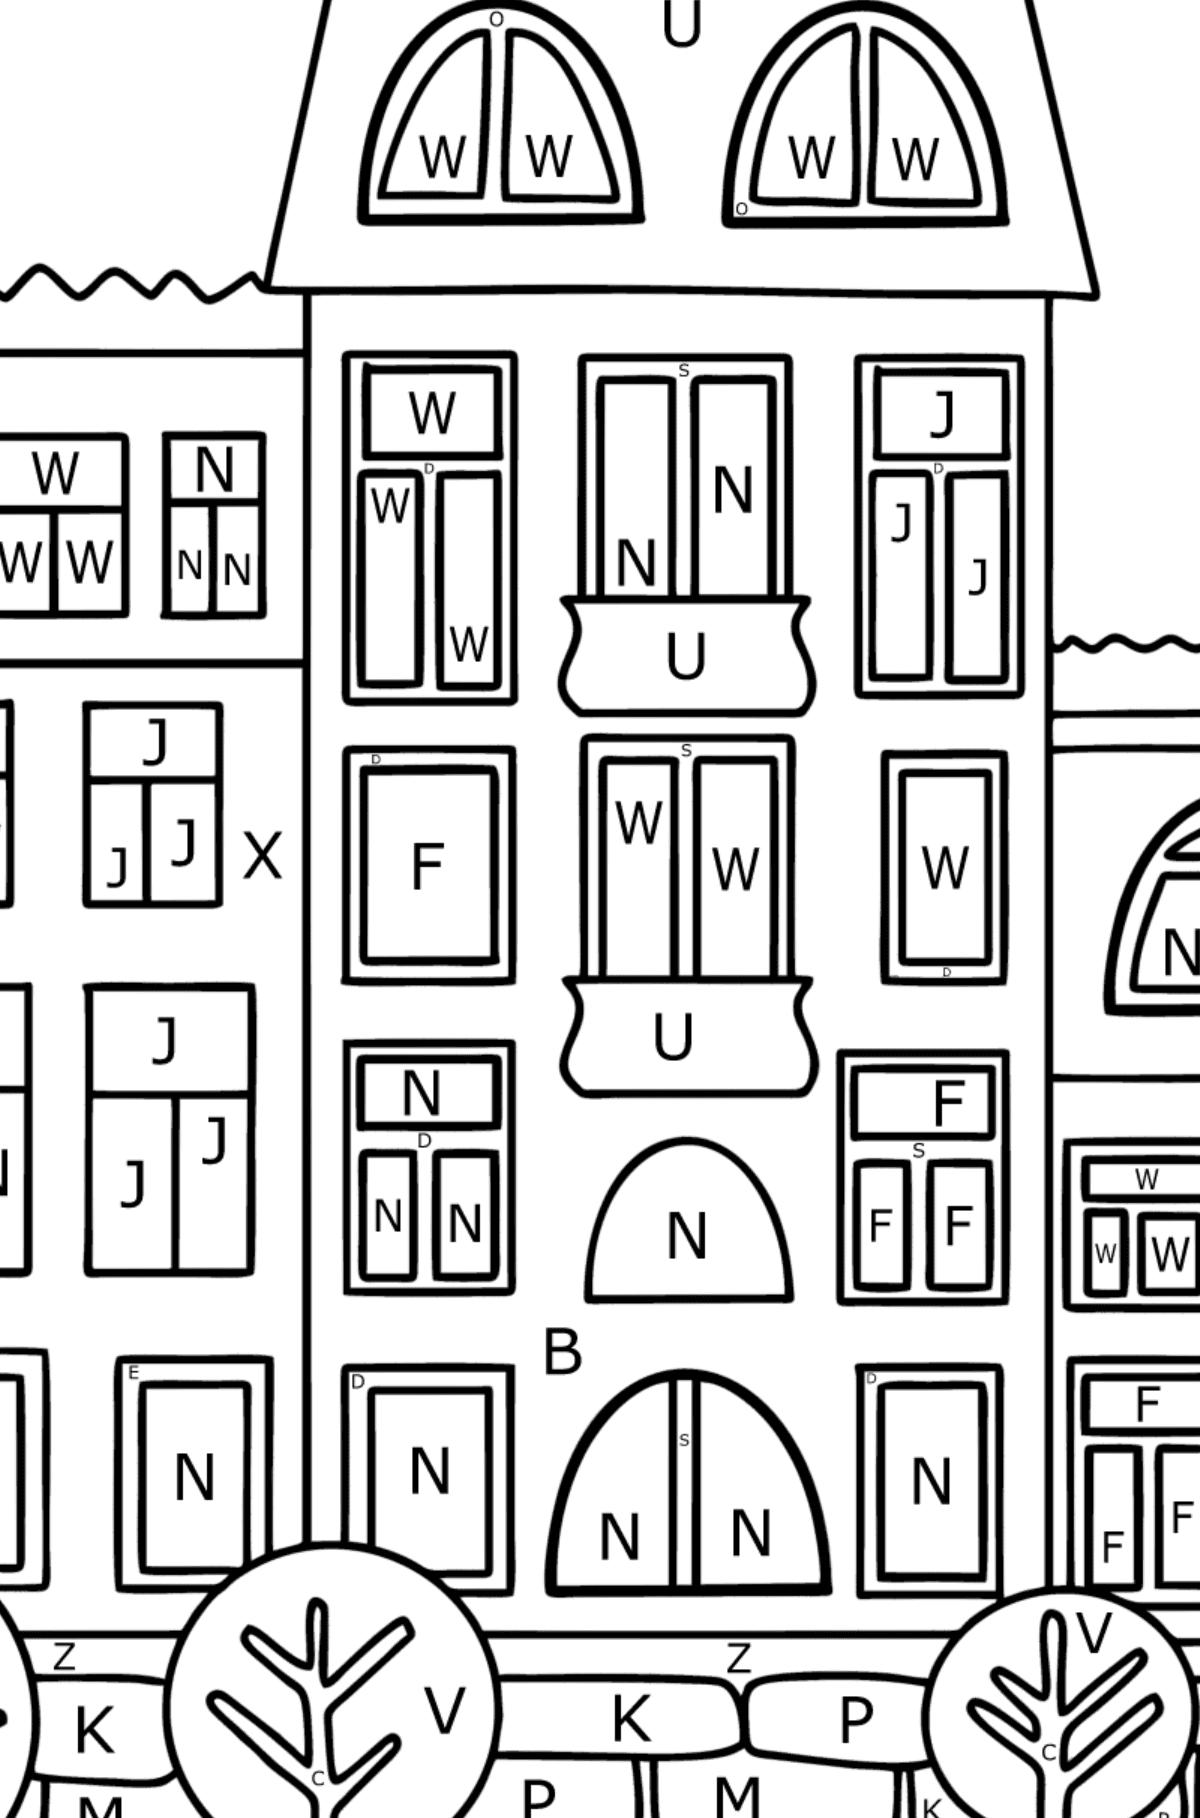 Multi-storey building coloring page - Coloring by Letters for Kids